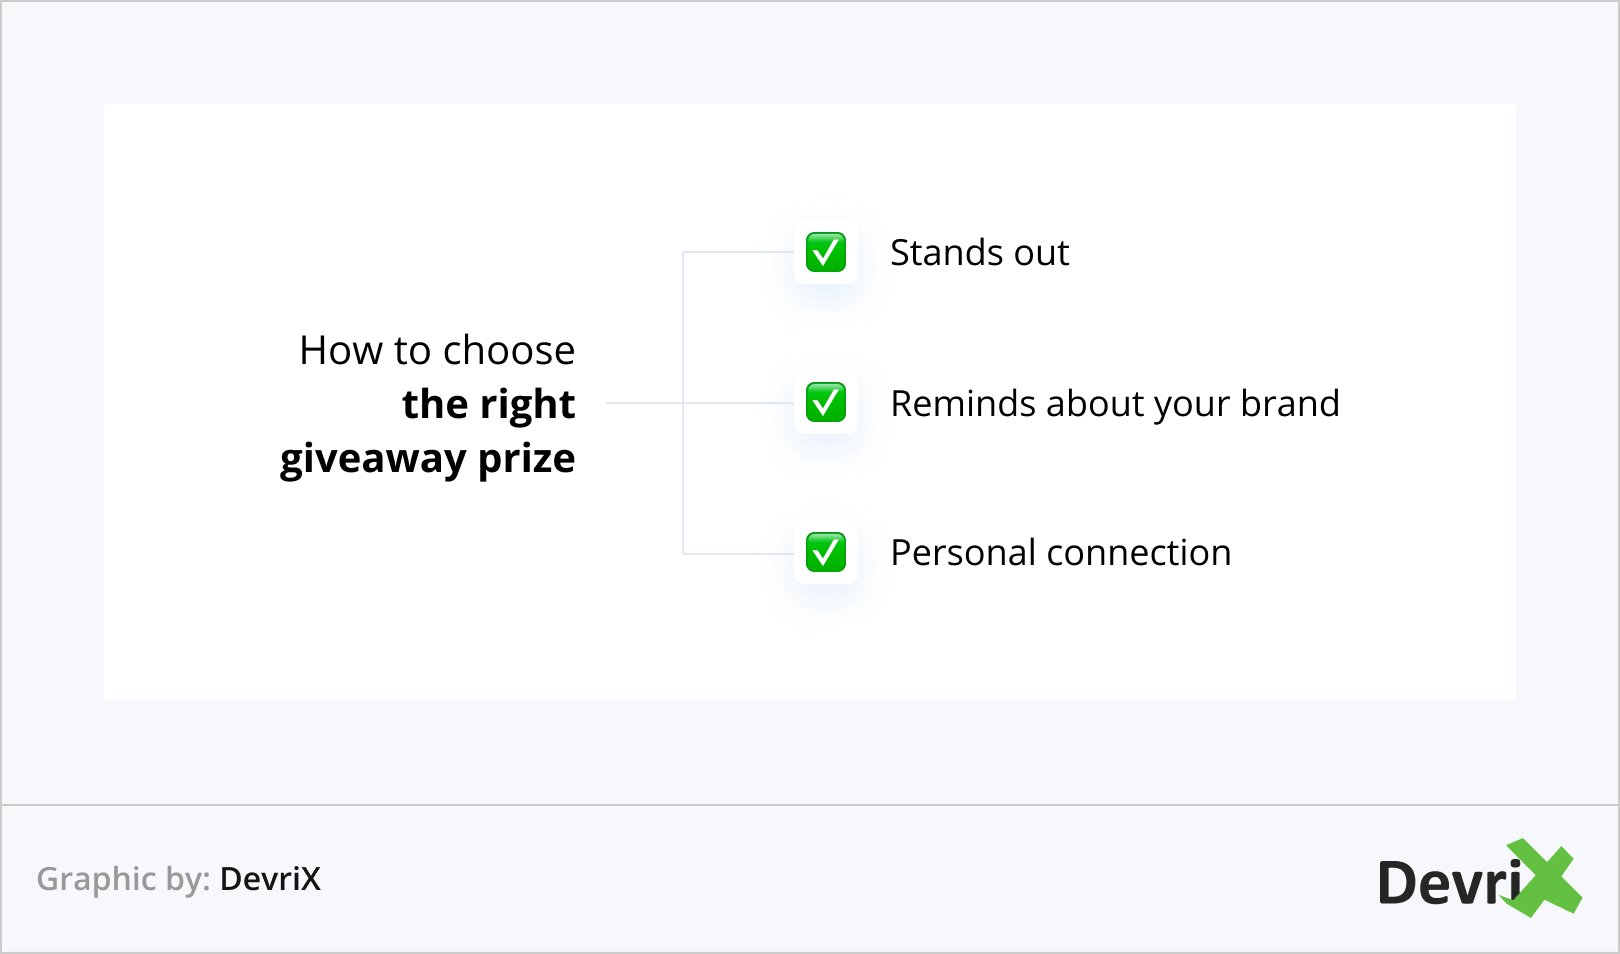 How to choose the right giveaway prize